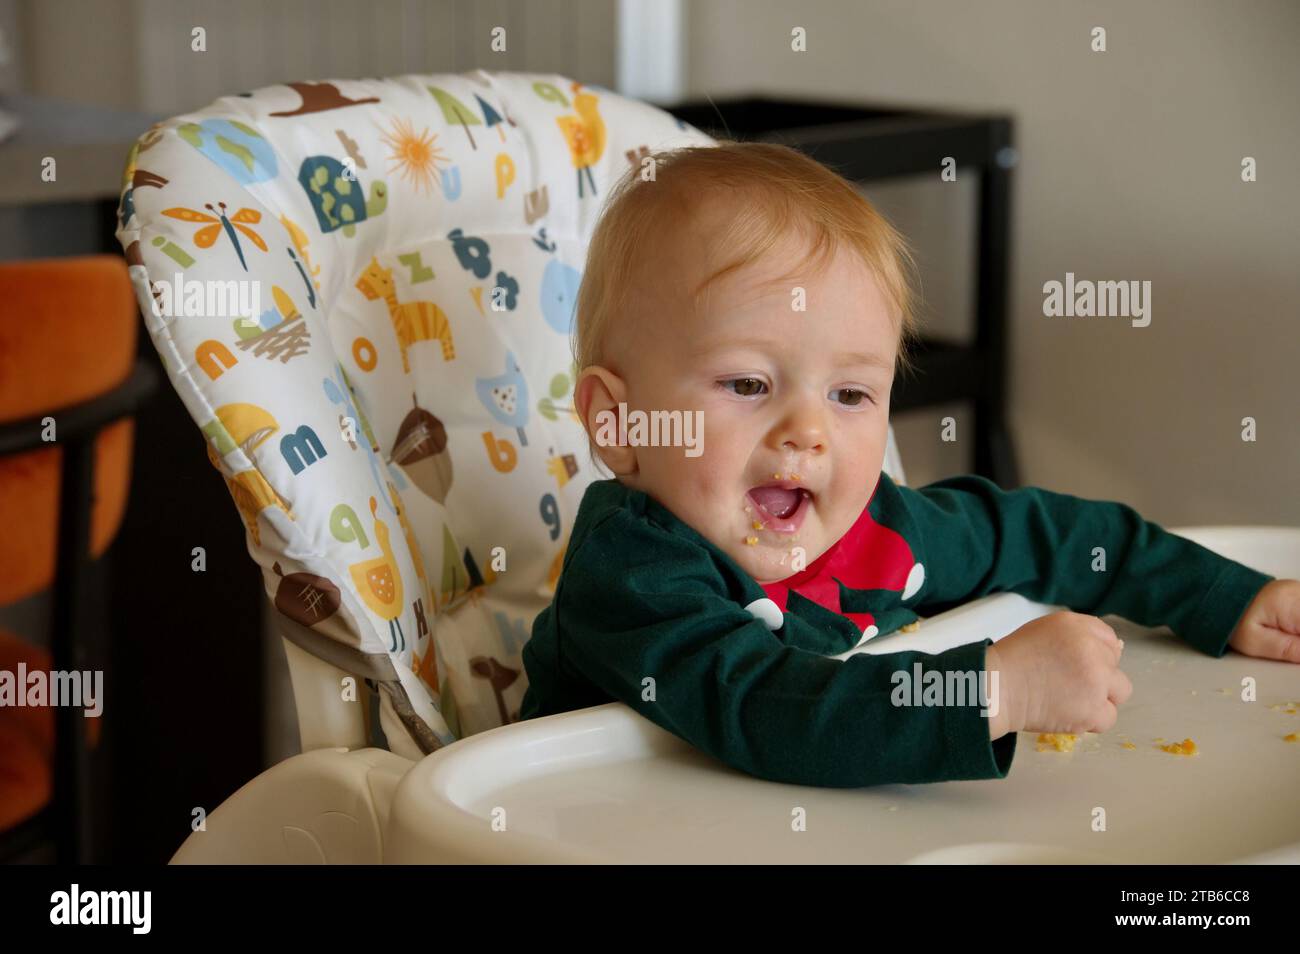 Adorable little baby girl sitting in high chair and eating Stock Photo